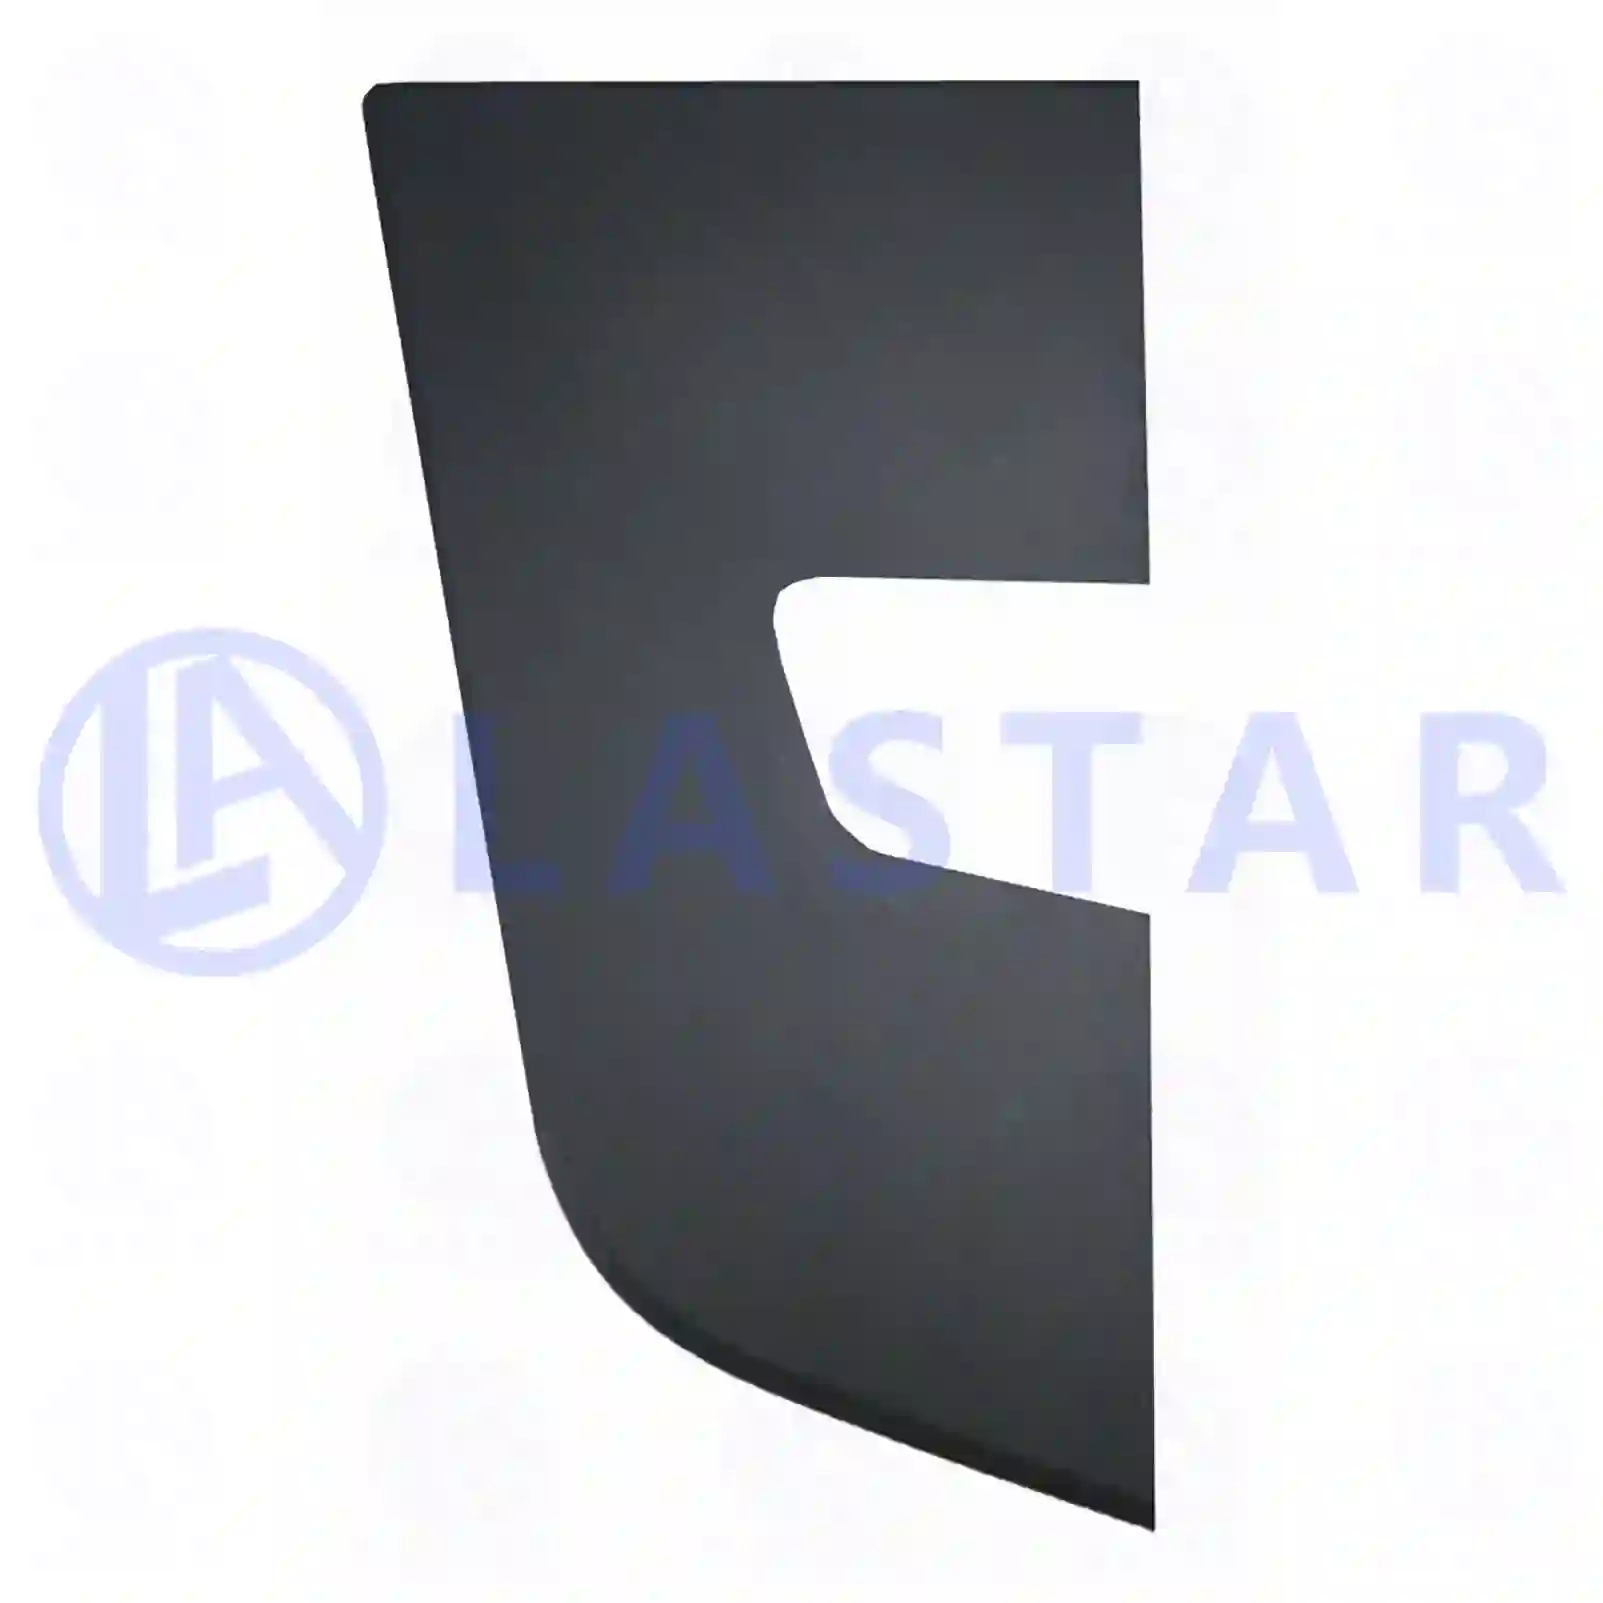 Cover, front grill, right, 77721088, 82063911, ZG60457-0008 ||  77721088 Lastar Spare Part | Truck Spare Parts, Auotomotive Spare Parts Cover, front grill, right, 77721088, 82063911, ZG60457-0008 ||  77721088 Lastar Spare Part | Truck Spare Parts, Auotomotive Spare Parts